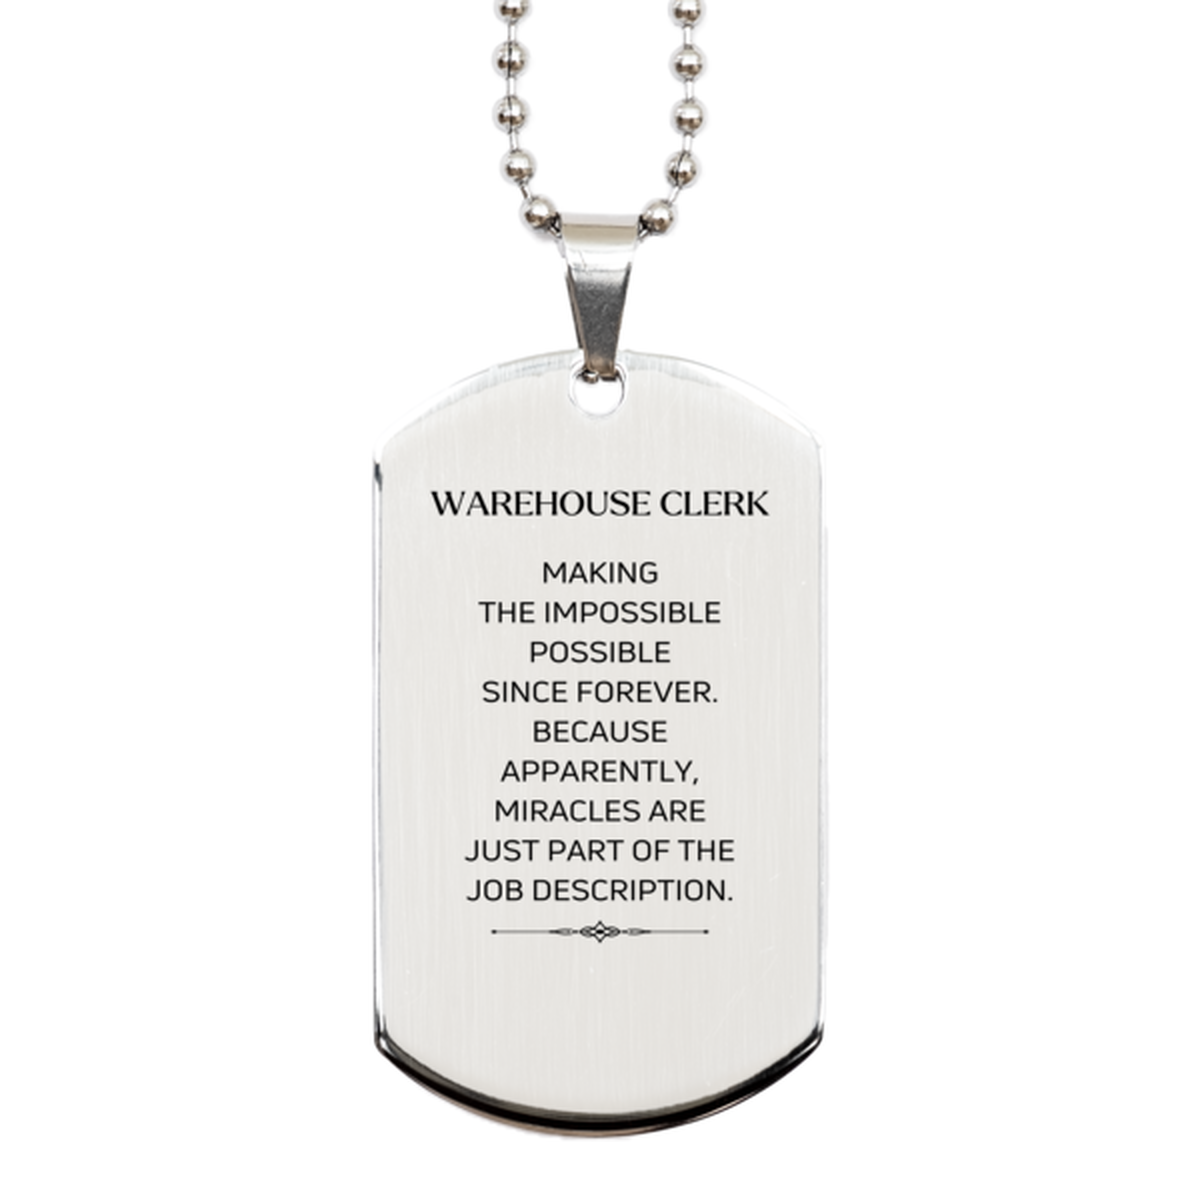 Funny Warehouse Clerk Gifts, Miracles are just part of the job description, Inspirational Birthday Silver Dog Tag For Warehouse Clerk, Men, Women, Coworkers, Friends, Boss